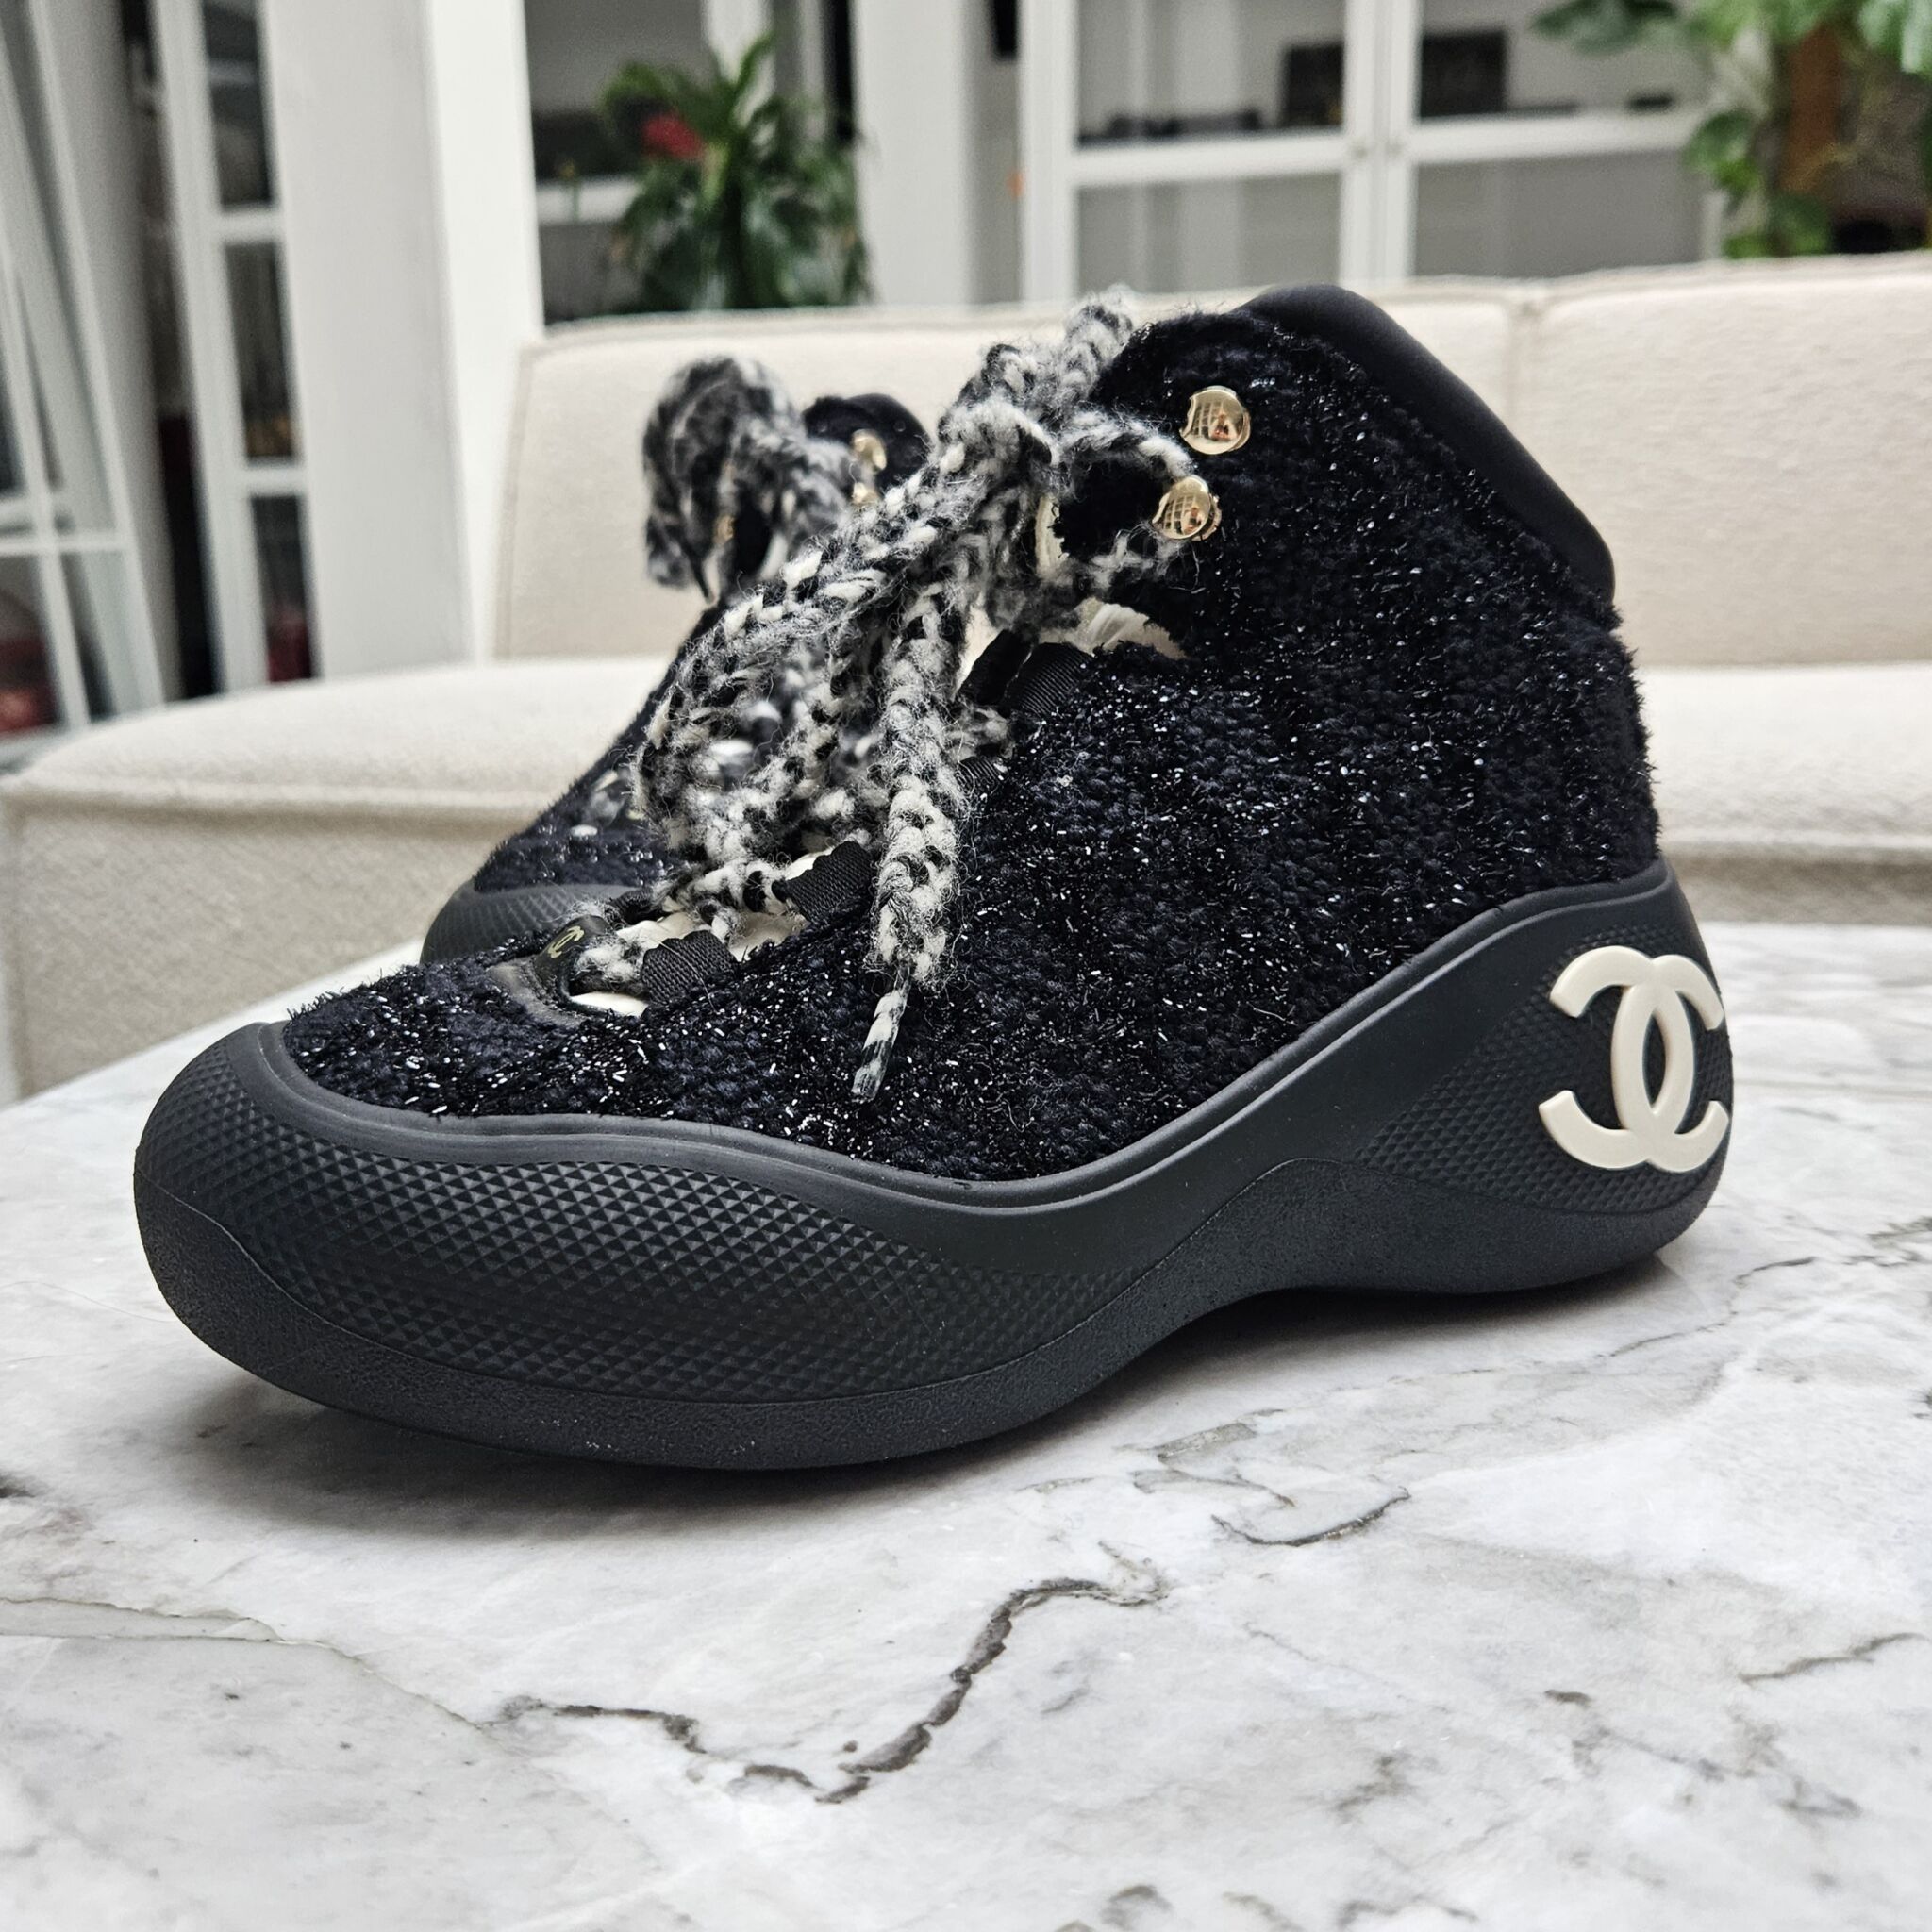 CHANEL, Shoes, Chanel High Top Sneakers